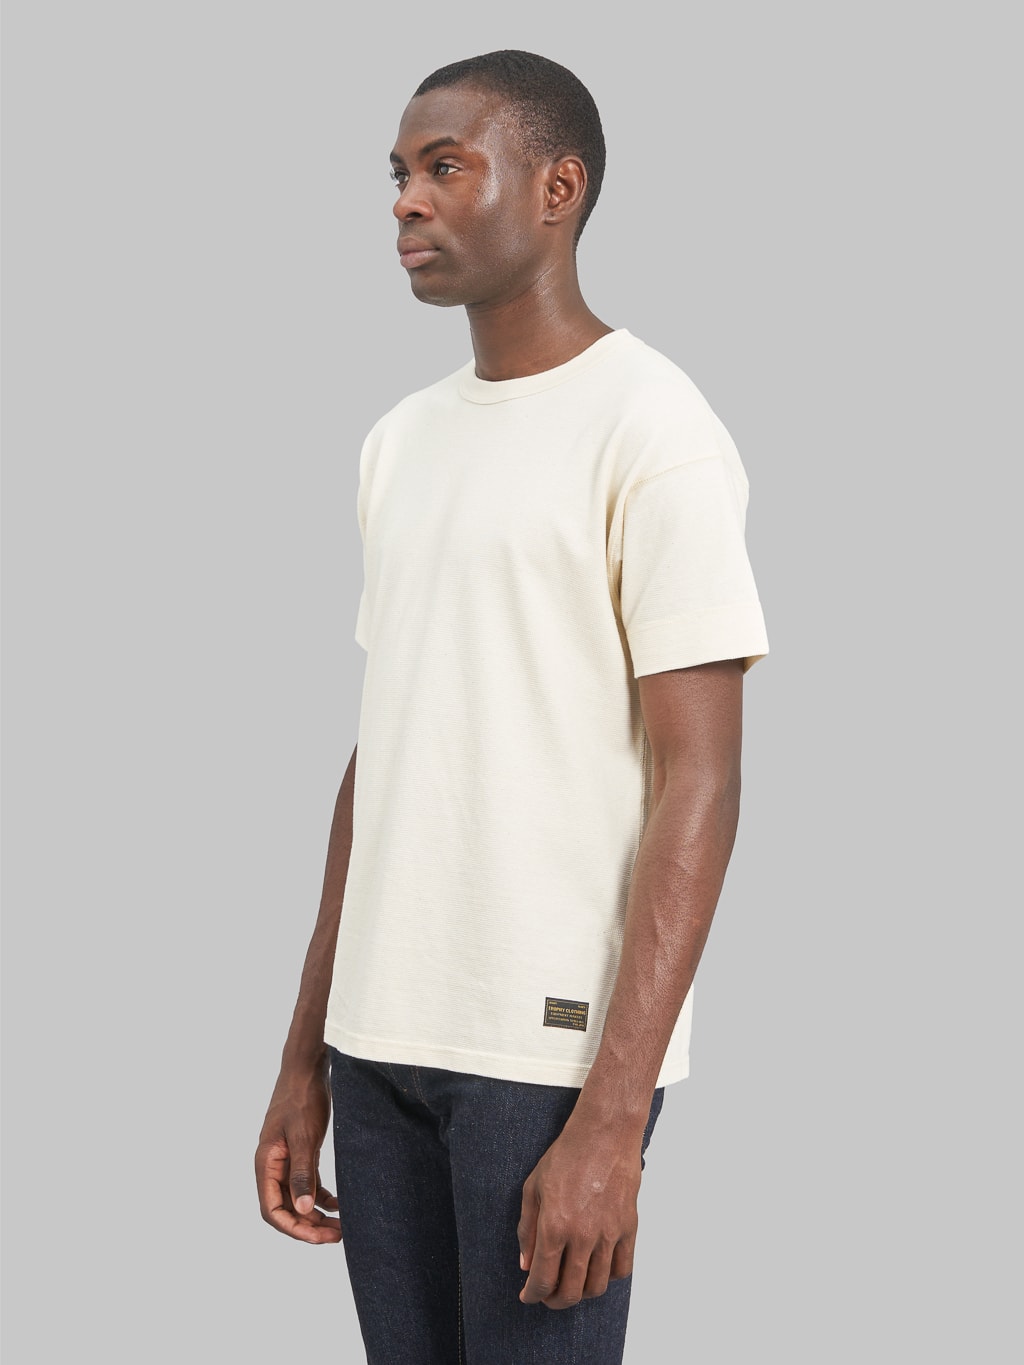 Trophy Clothing Utility Mil Tee natural model side fit